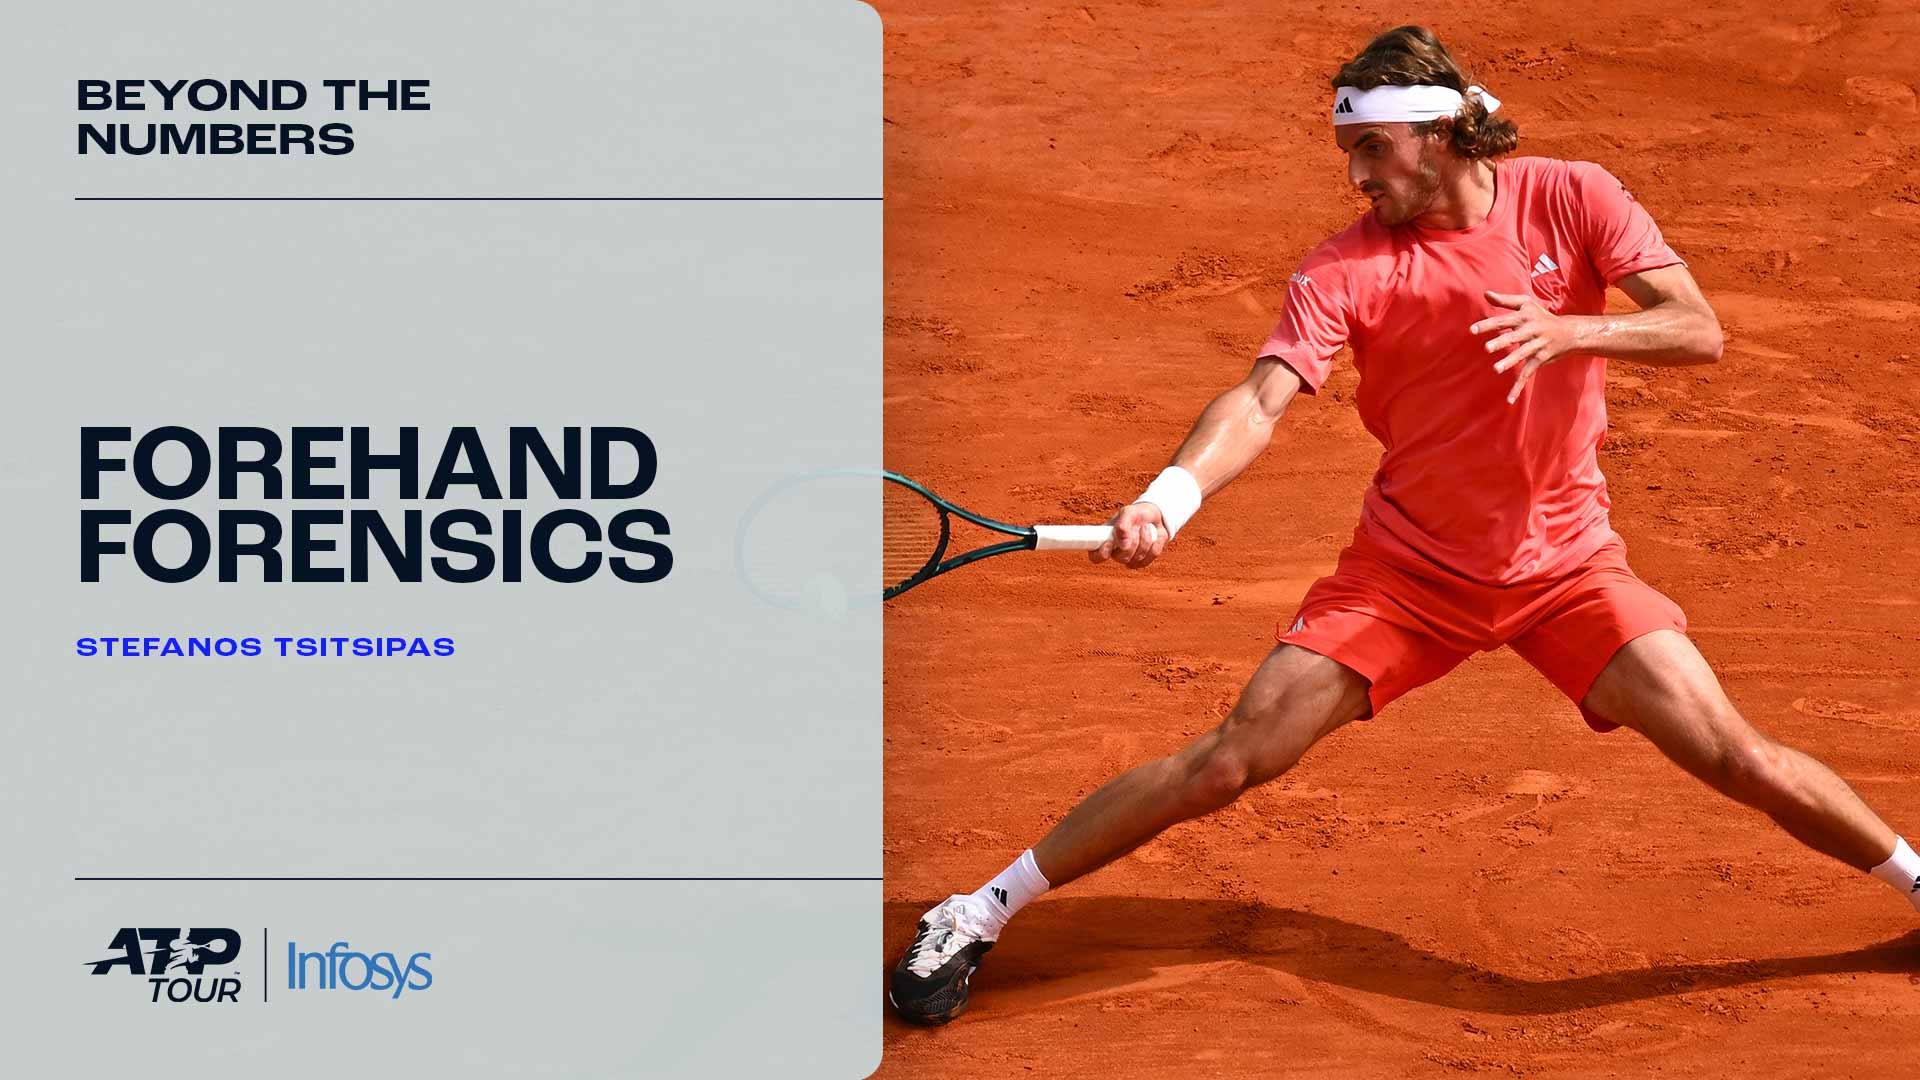 Stefanos Tsitsipas has leaned on his forehand throughout the clay swing.